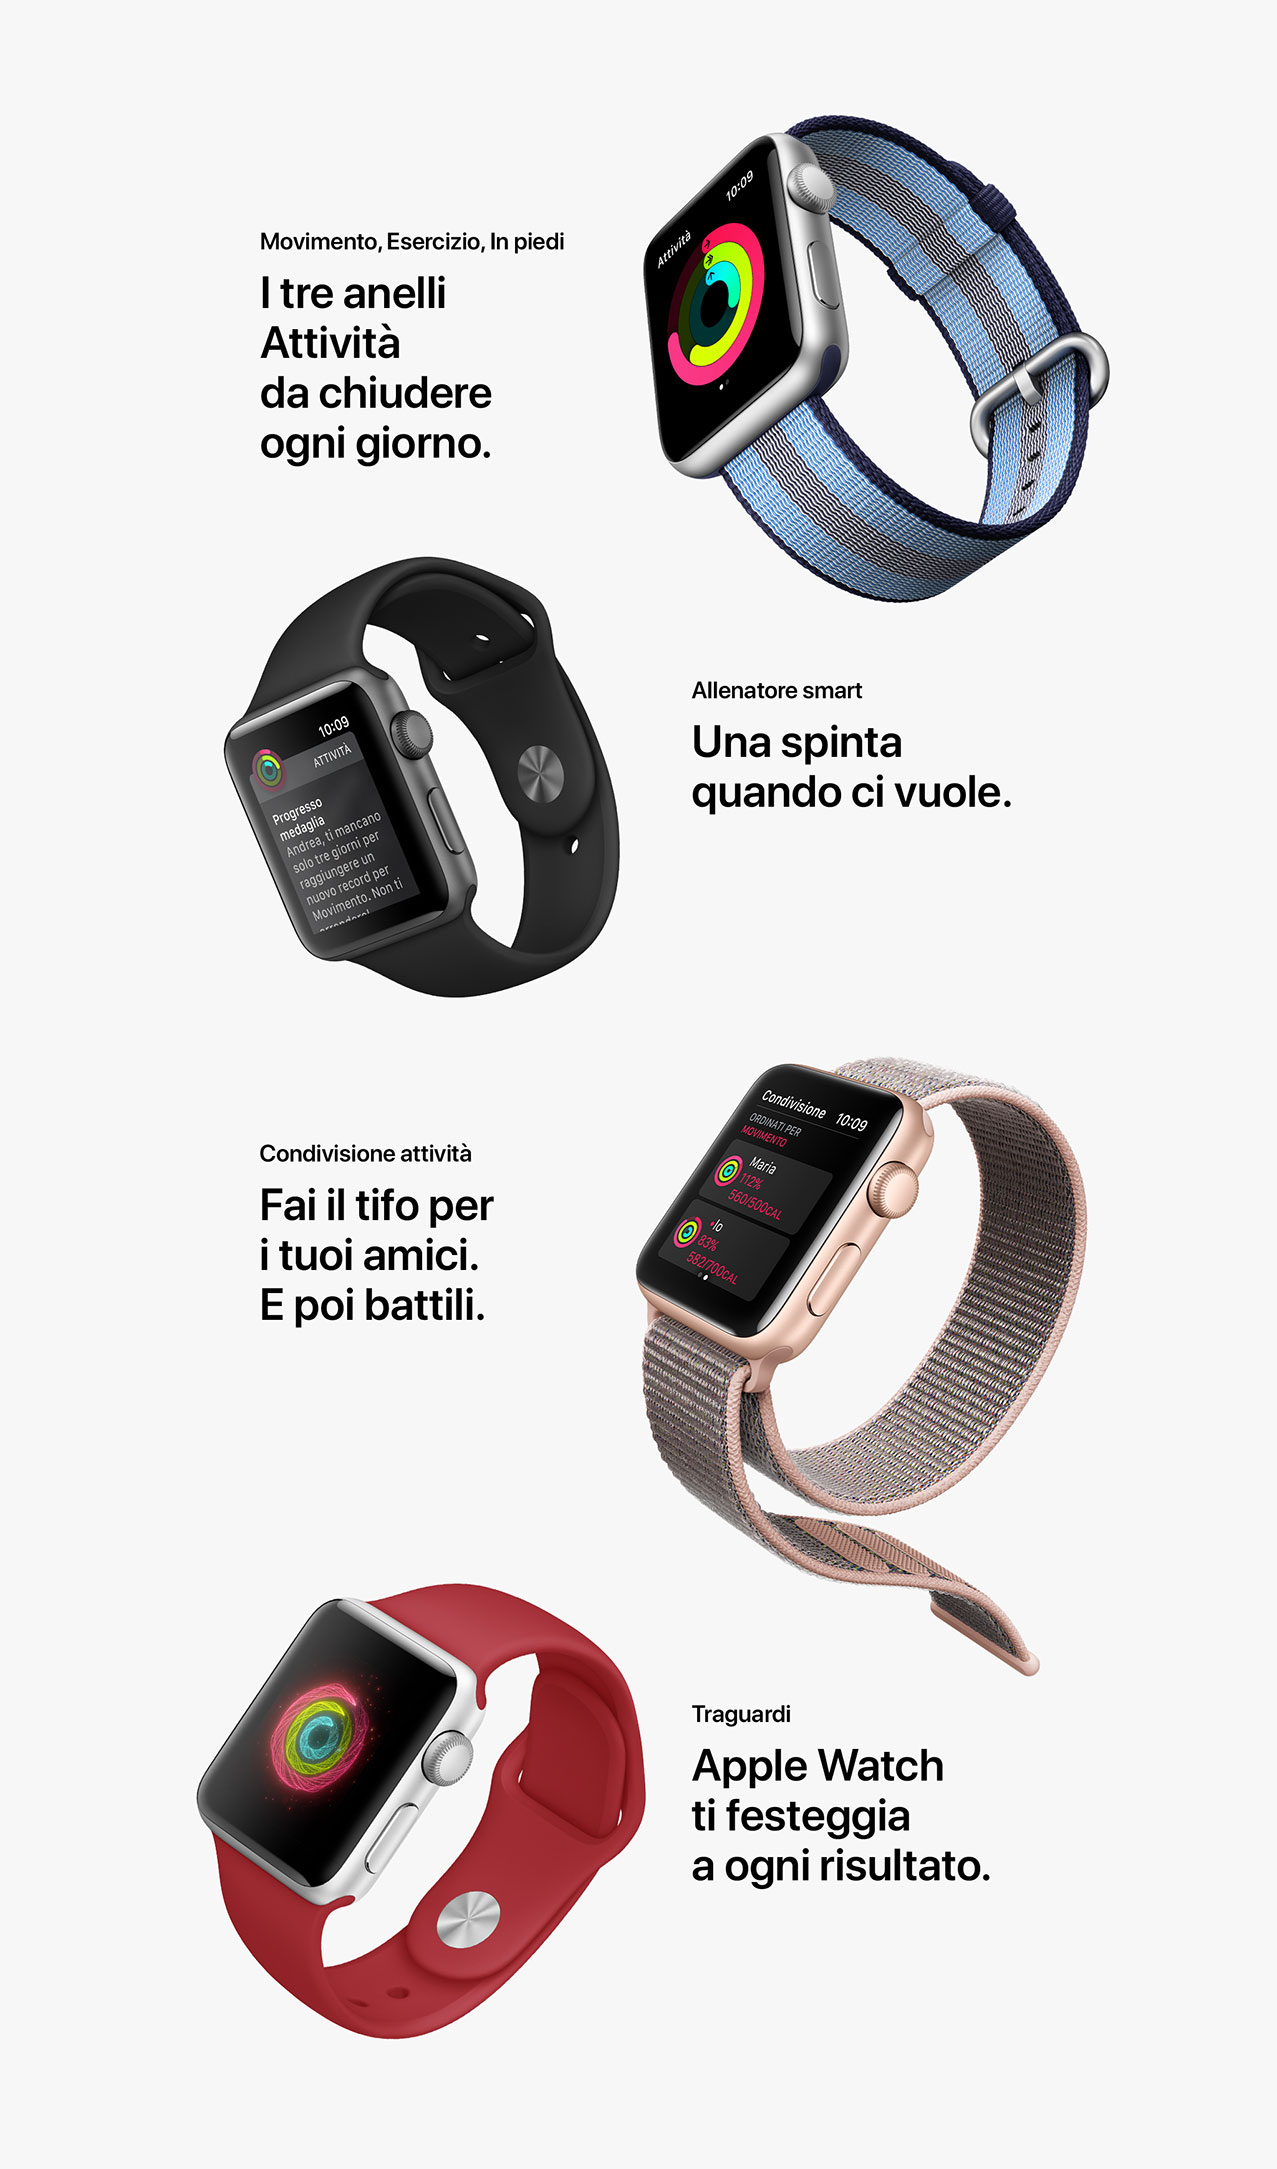 Apple Watch series 3 features